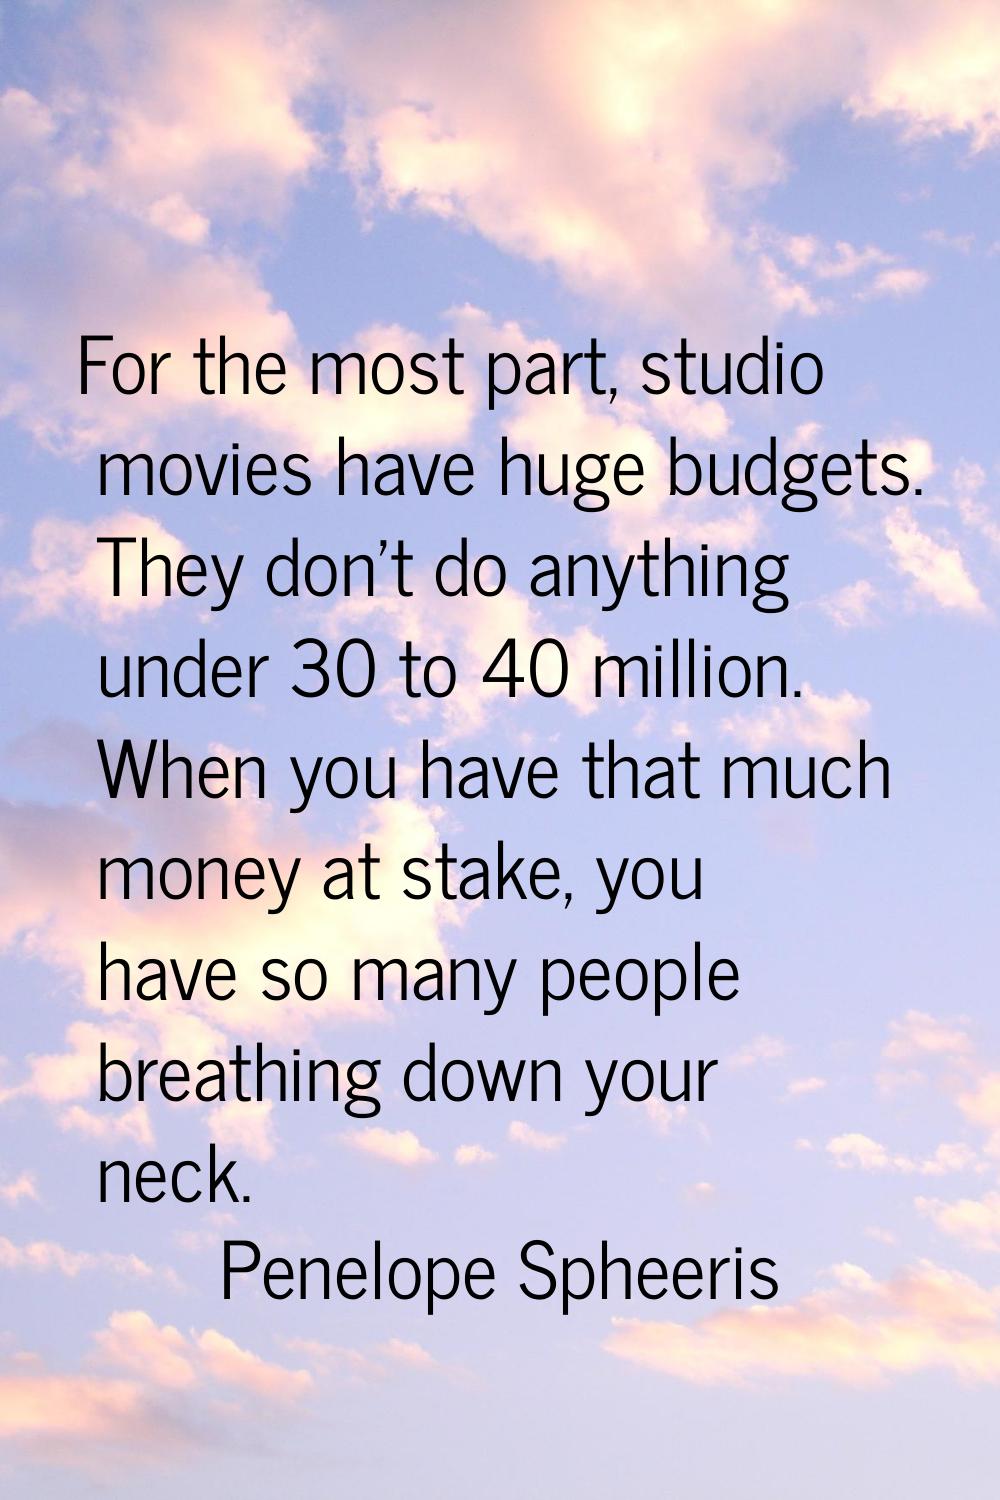 For the most part, studio movies have huge budgets. They don't do anything under 30 to 40 million. 